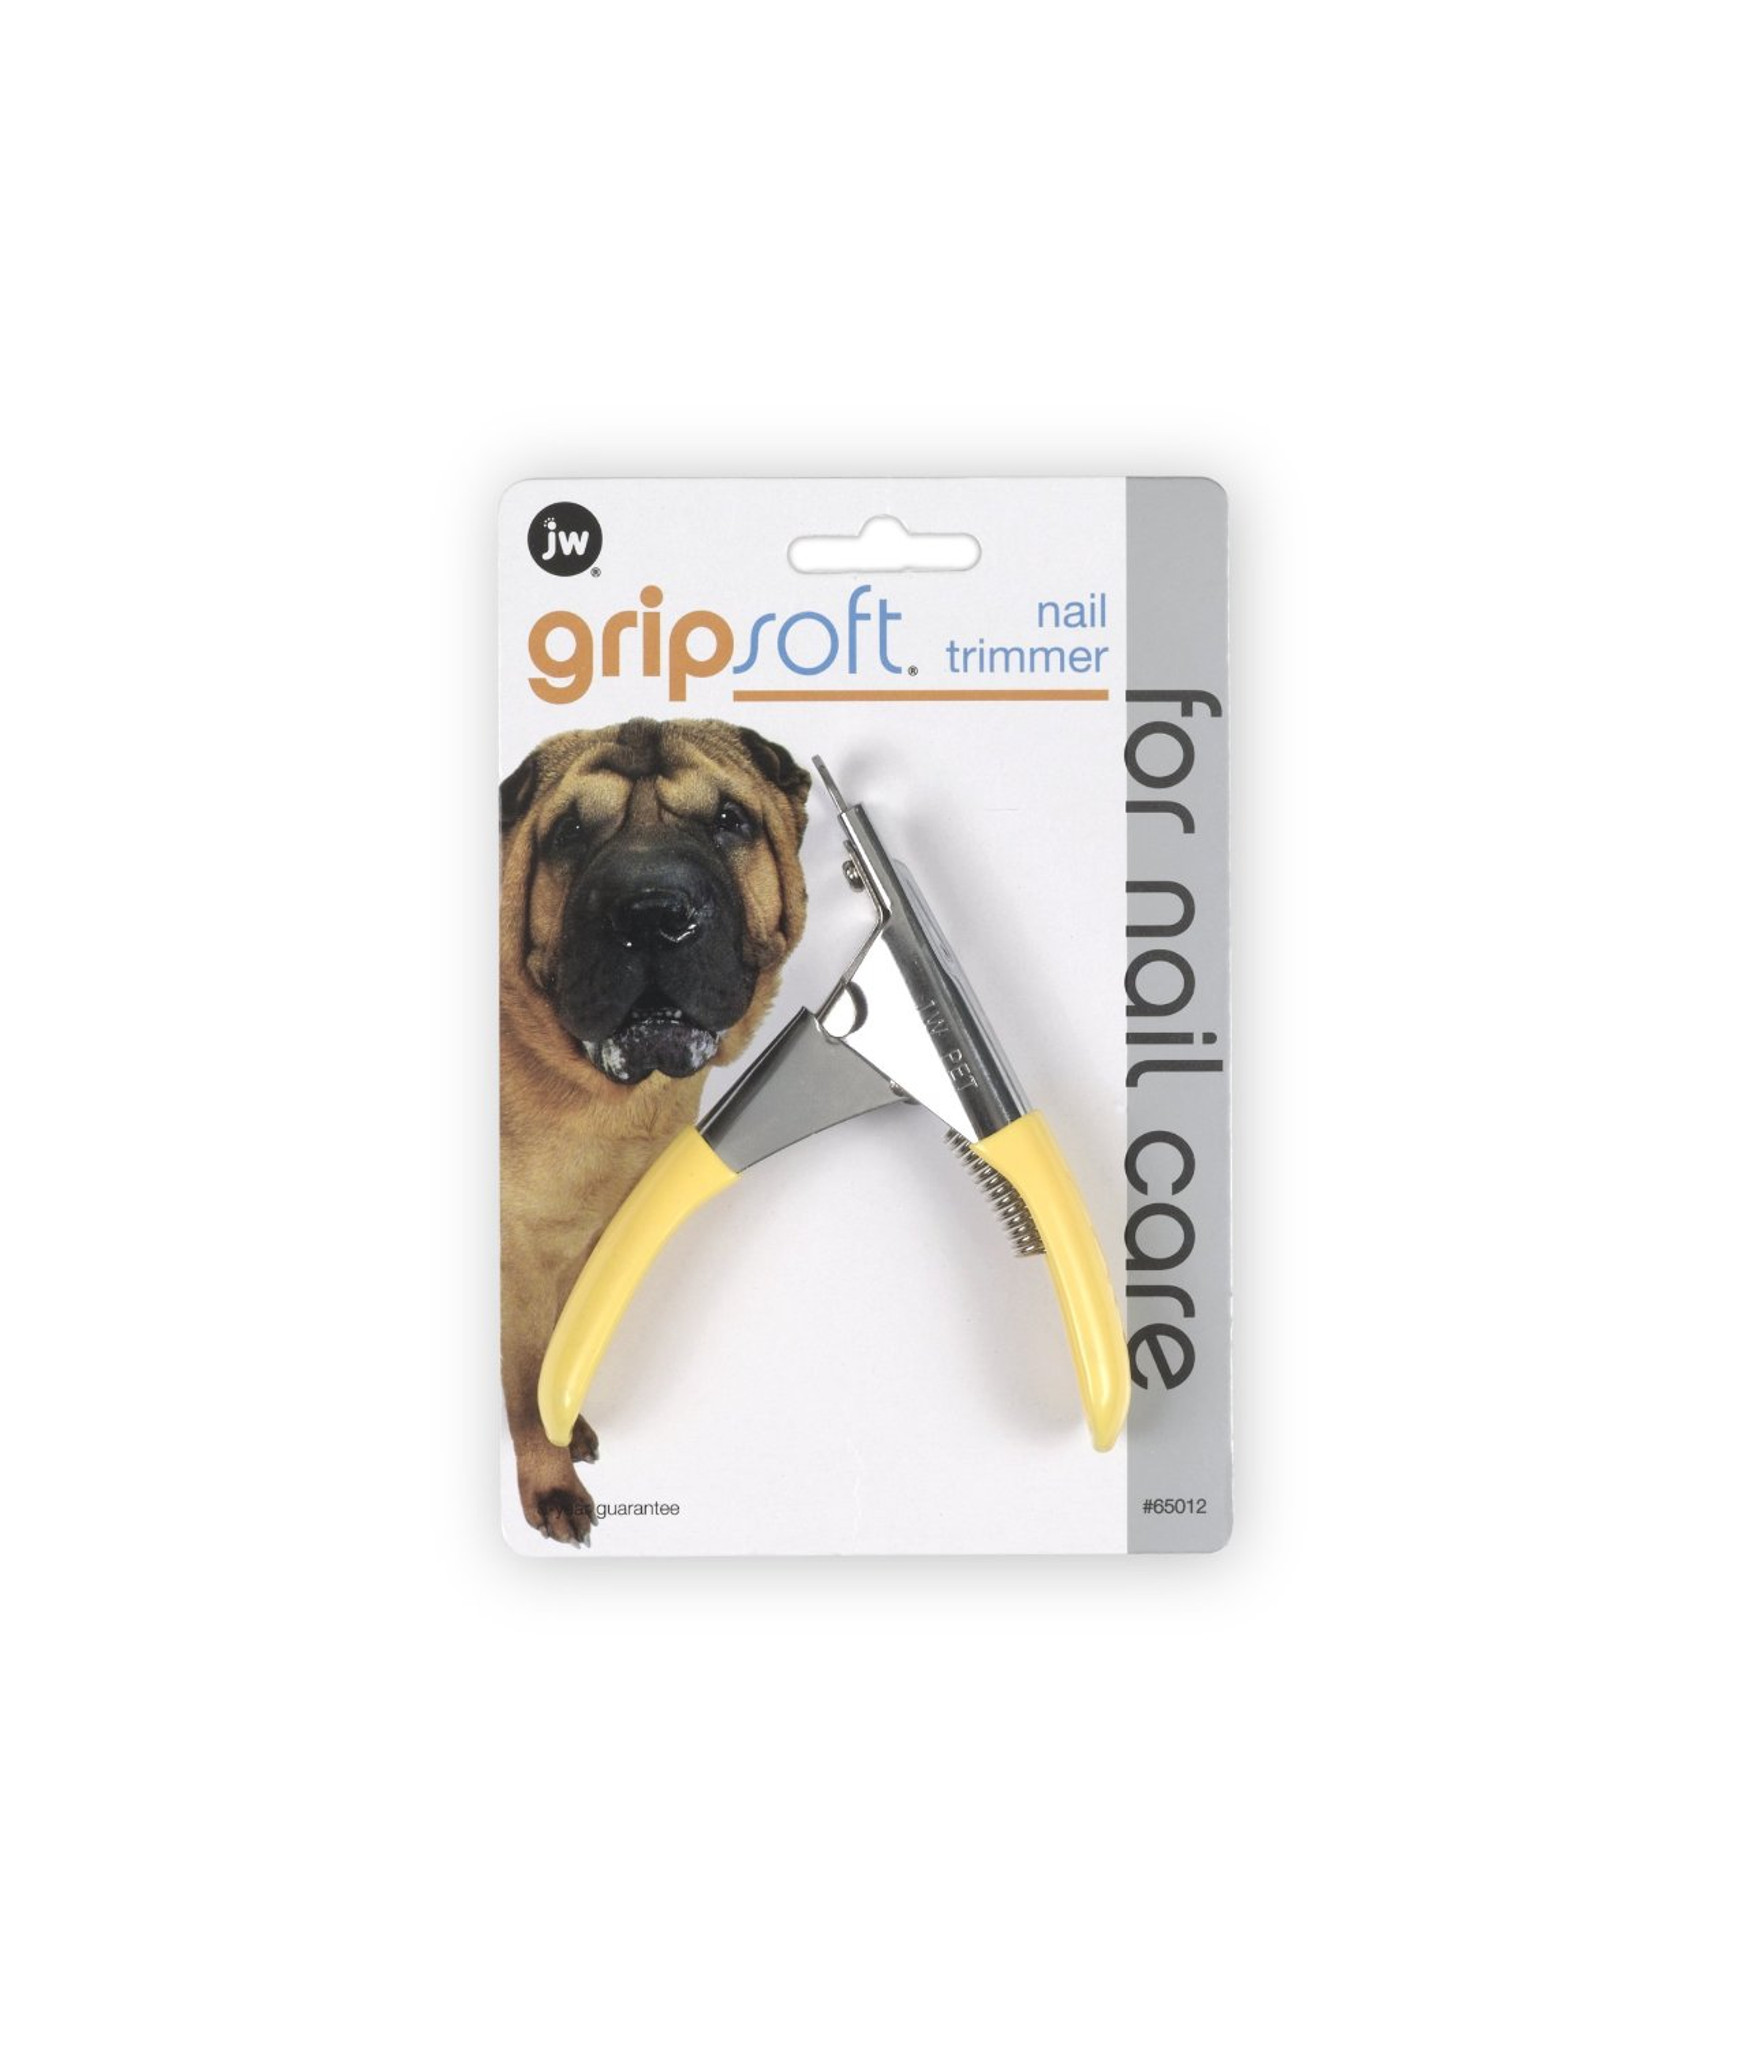 Pet Dog Nail Clippers Cat Rabbit Bird Guinea Pig Easy Use Claw Trimmers  Scissors | eBay